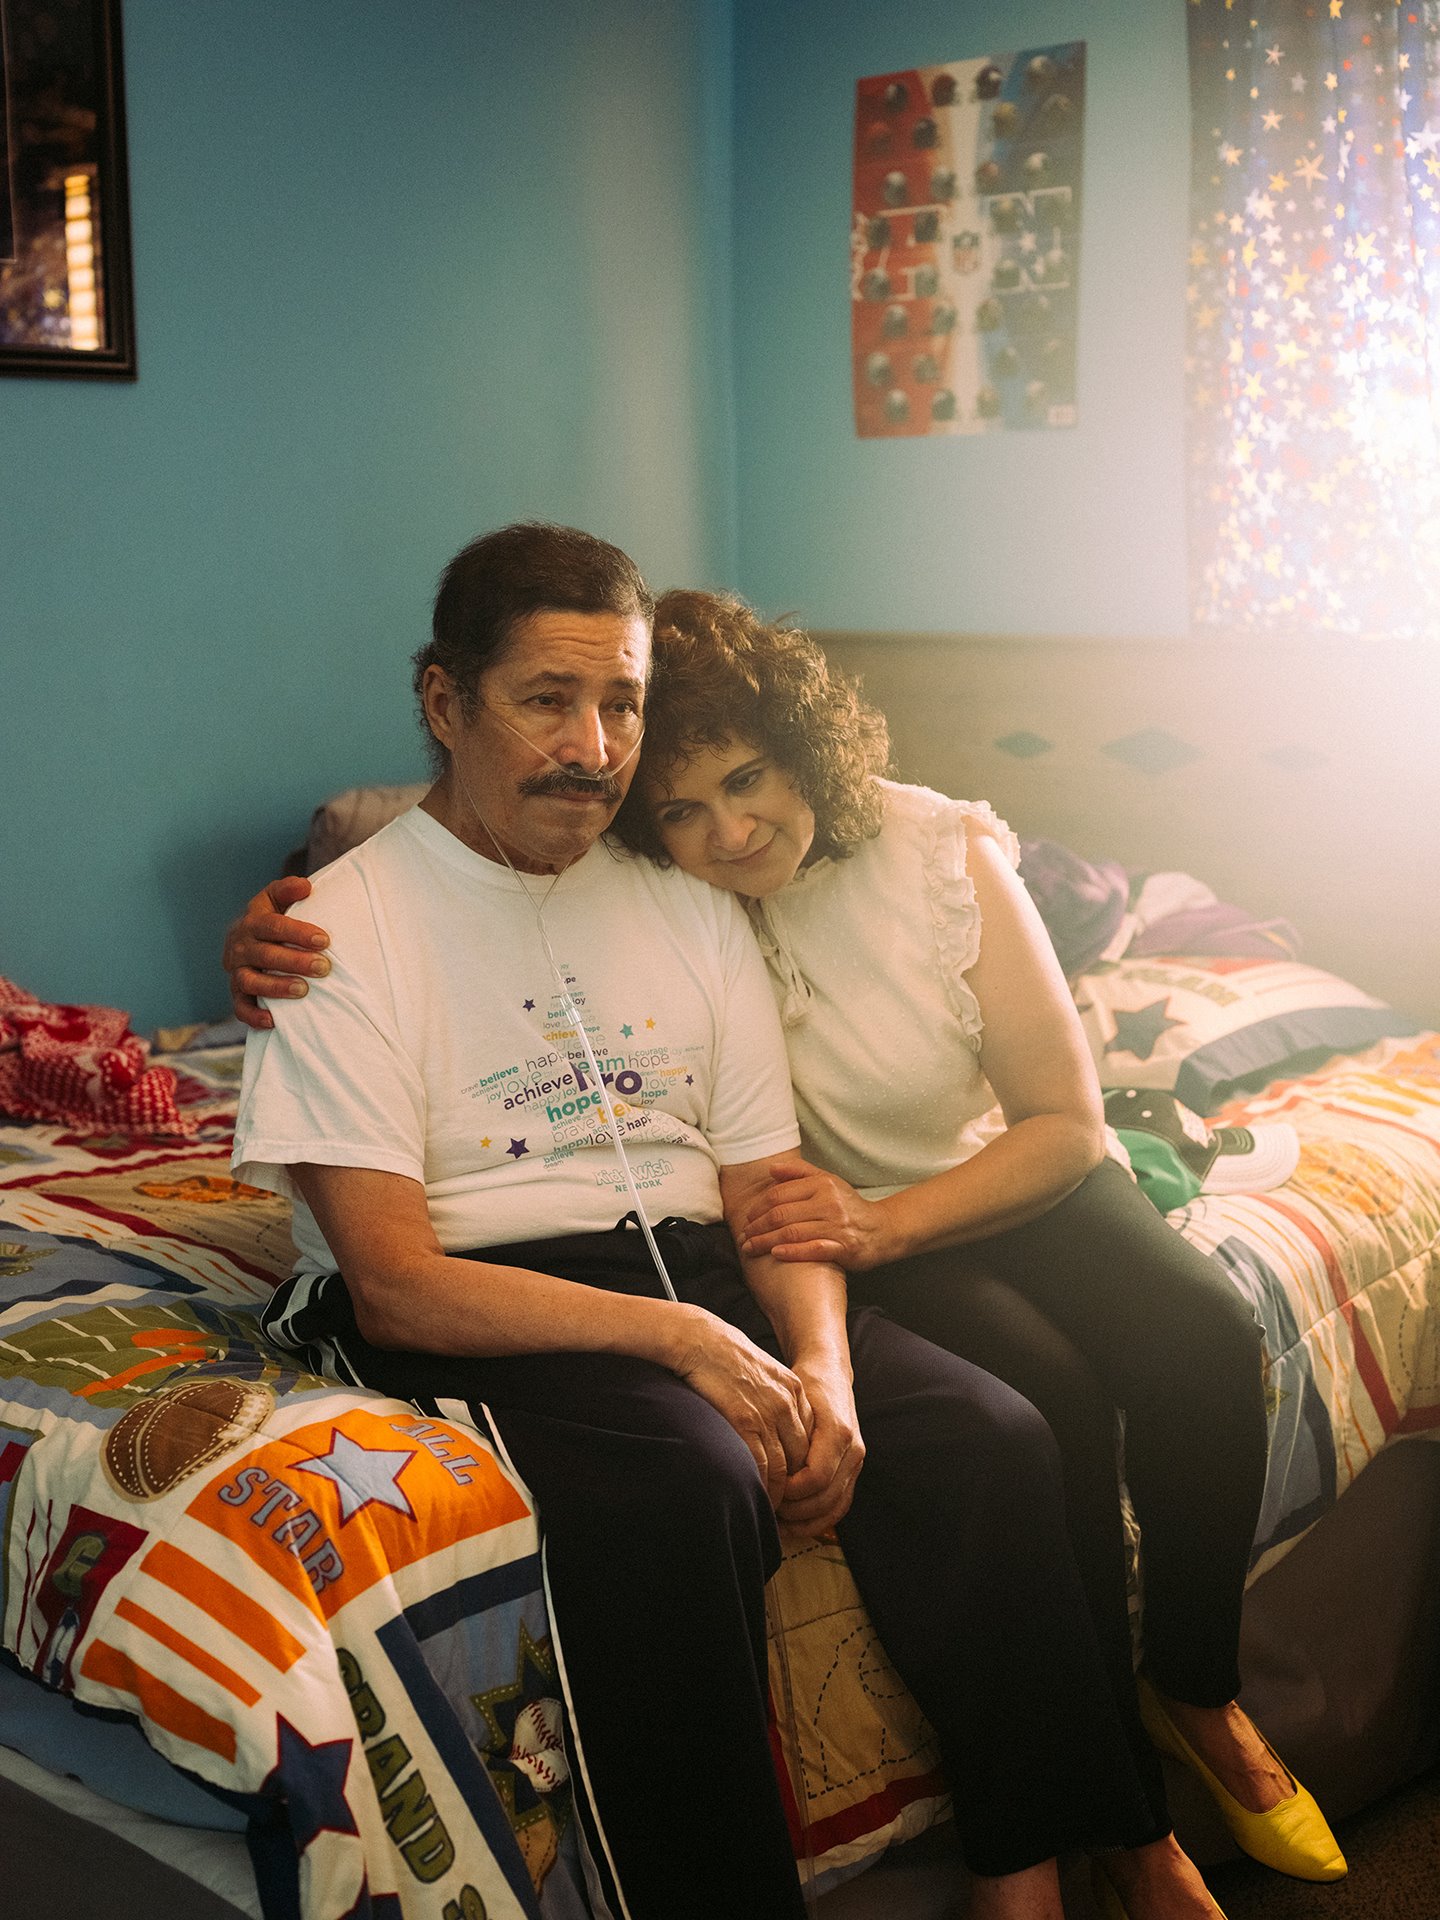 José sits in his room with his sister Sara, in Sioux Falls, South Dakota, USA. José worked in a meatpacking plant until contracting COVID-19 in April 2020. He was in hospital on a ventilator for five months, and still uses an oxygen cylinder. Sara also worked at the factory, but left to become a house cleaner. She took care of her brother during his illness.&nbsp;